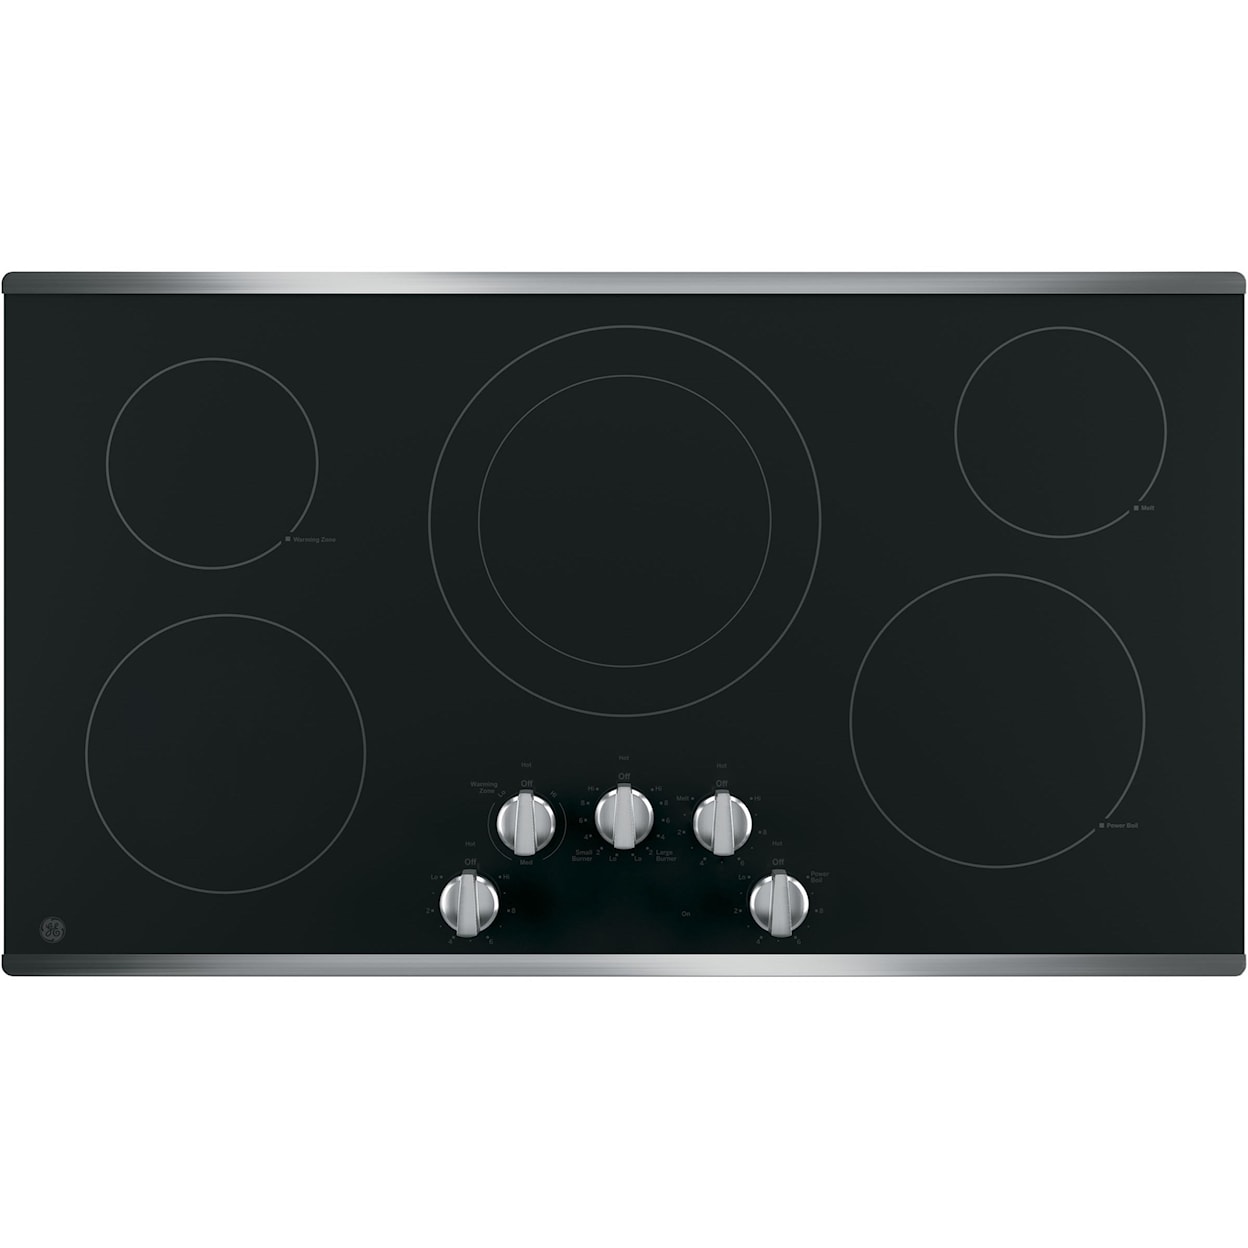 GE Appliances GE Electric Cooktops 36" Built-In Knob Control Electric Cooktop